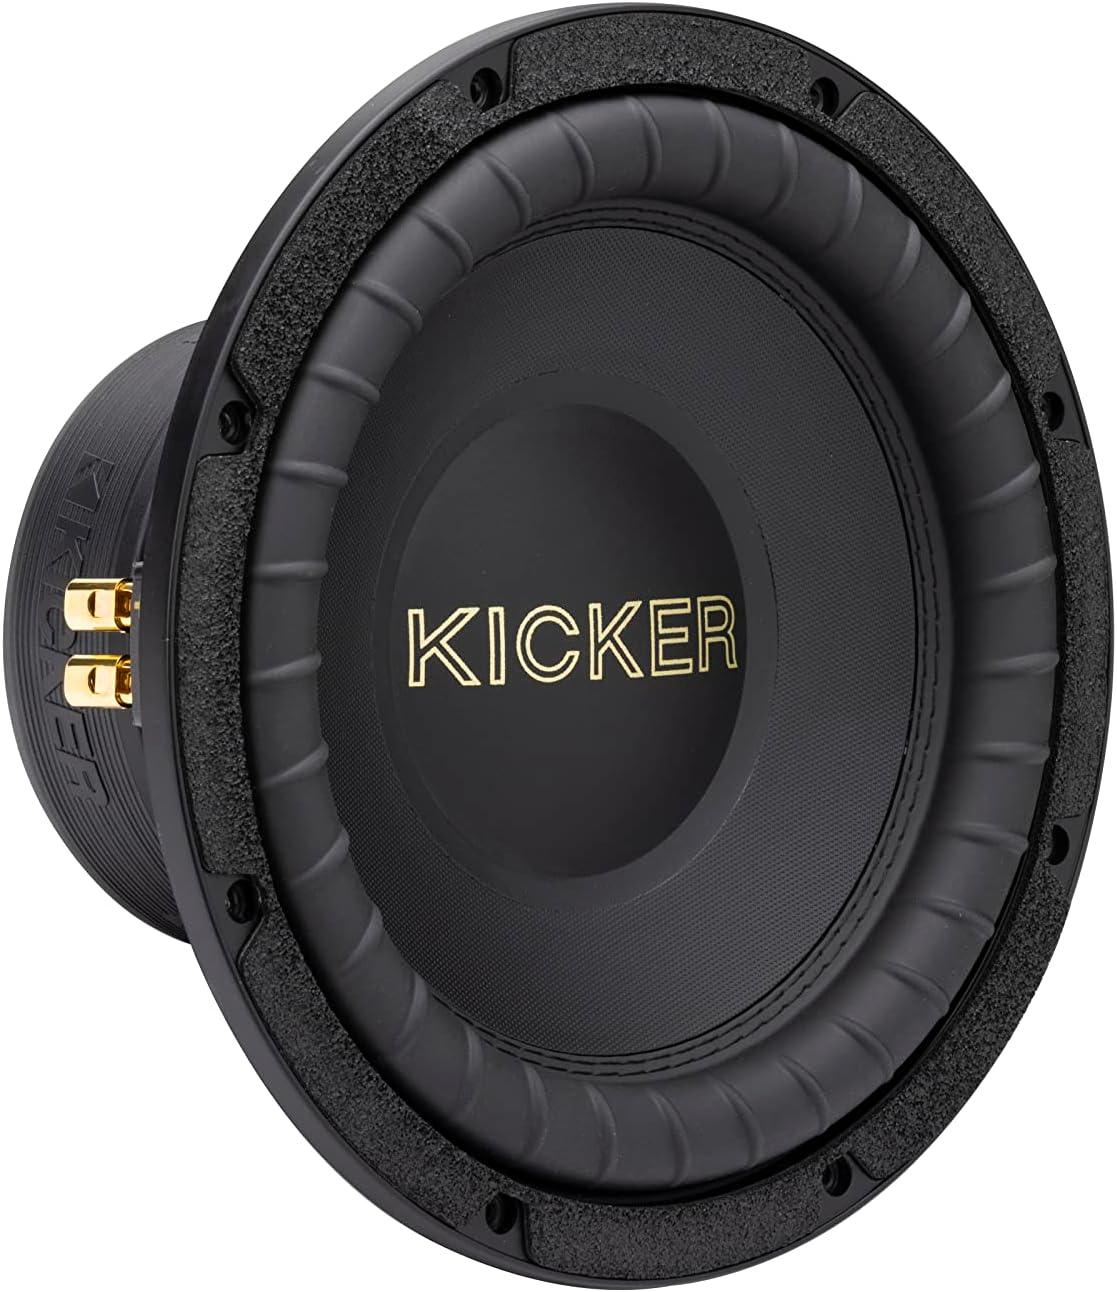 50GOLD104 KICKER 10" COMP GOLD SERIES SUBWOOFER SUB 50TH ANNIVERSARY EDITION 400W RMS 4 OHM DVC